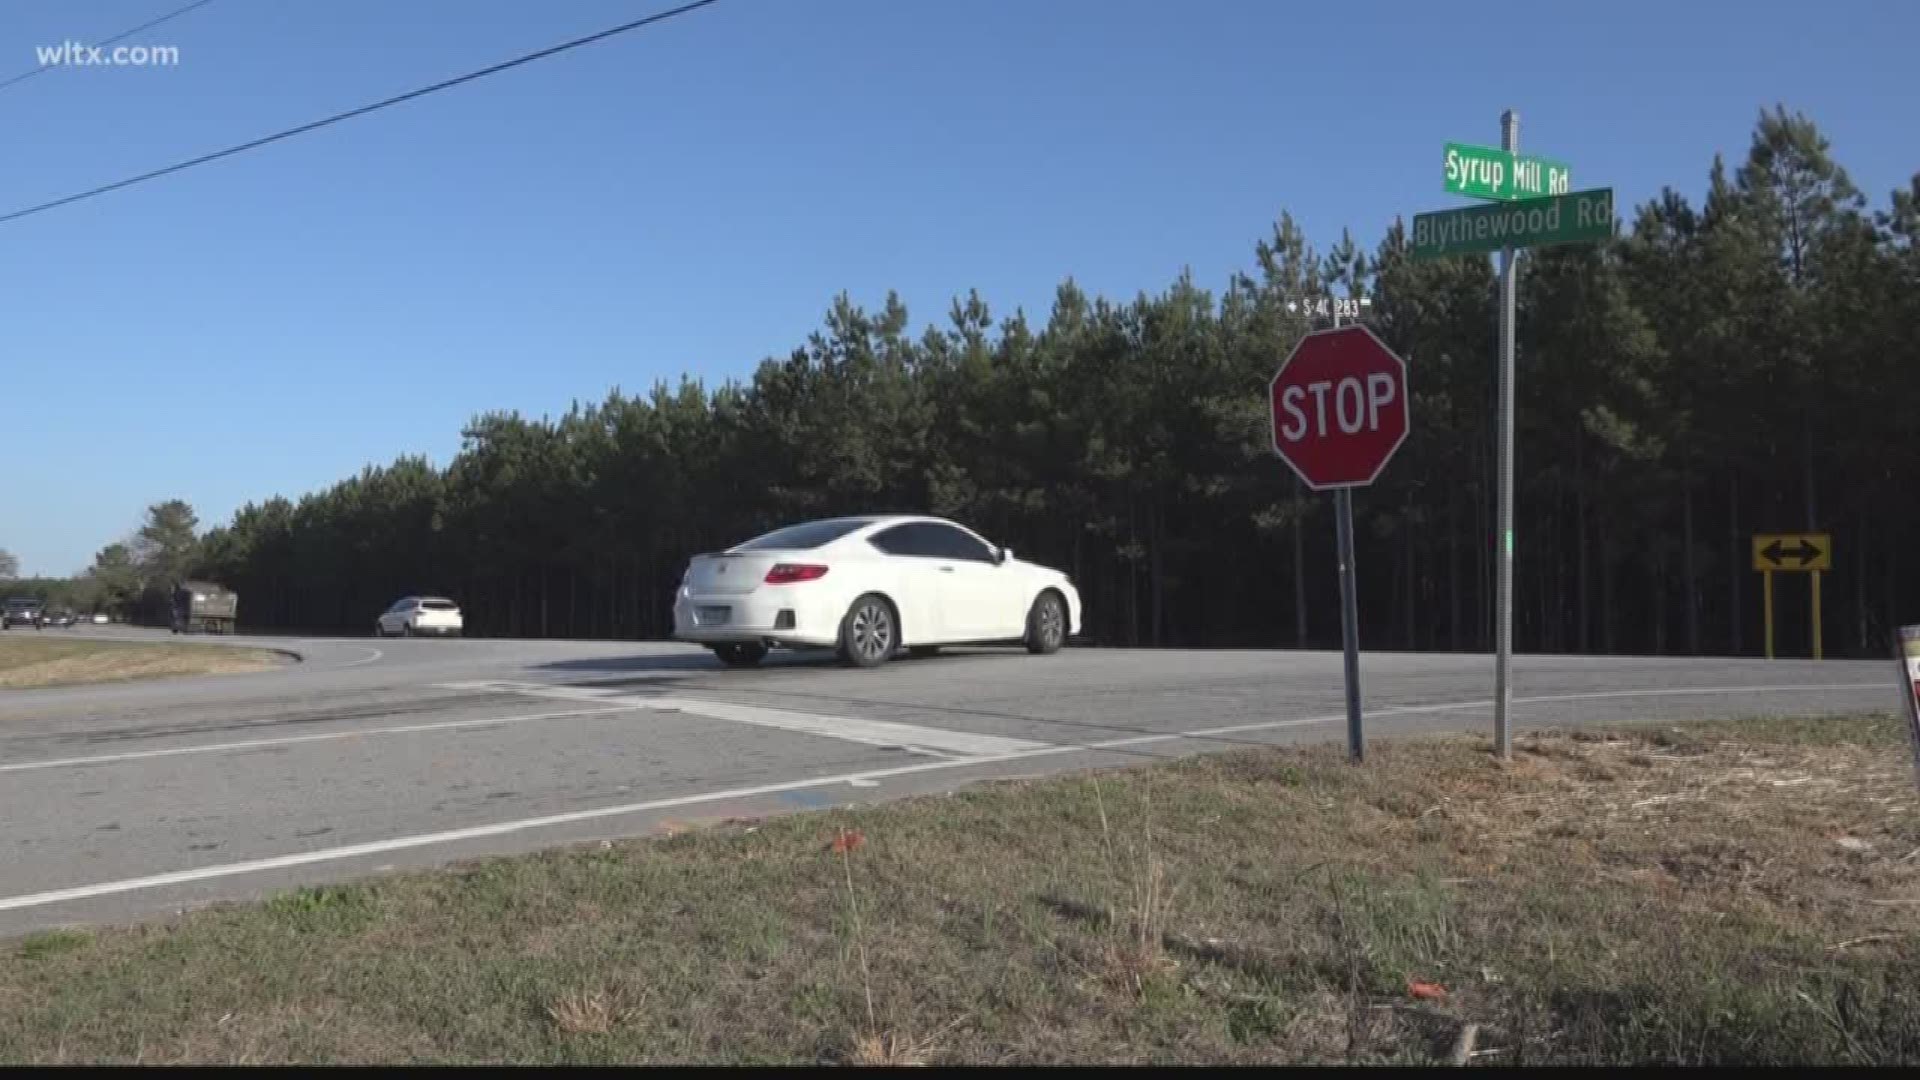 Richland County is increasing the size of Blythewood road, adding additional lanes and a traffic circle 